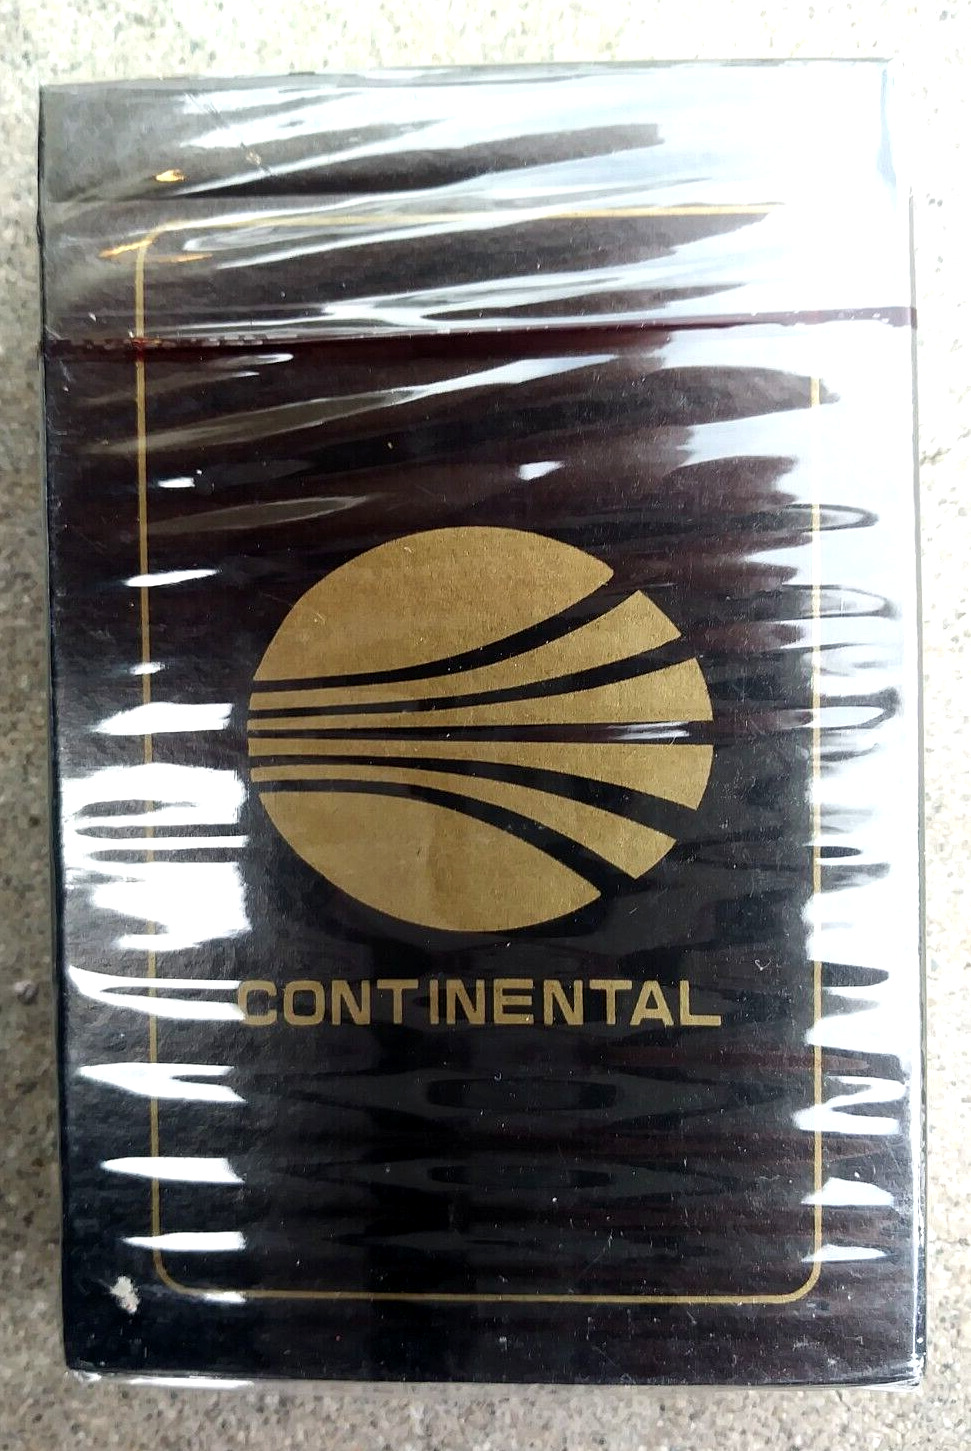 Vintage Continental Airlines Playing Cards, Black and Gold Meatball Logo, Sealed